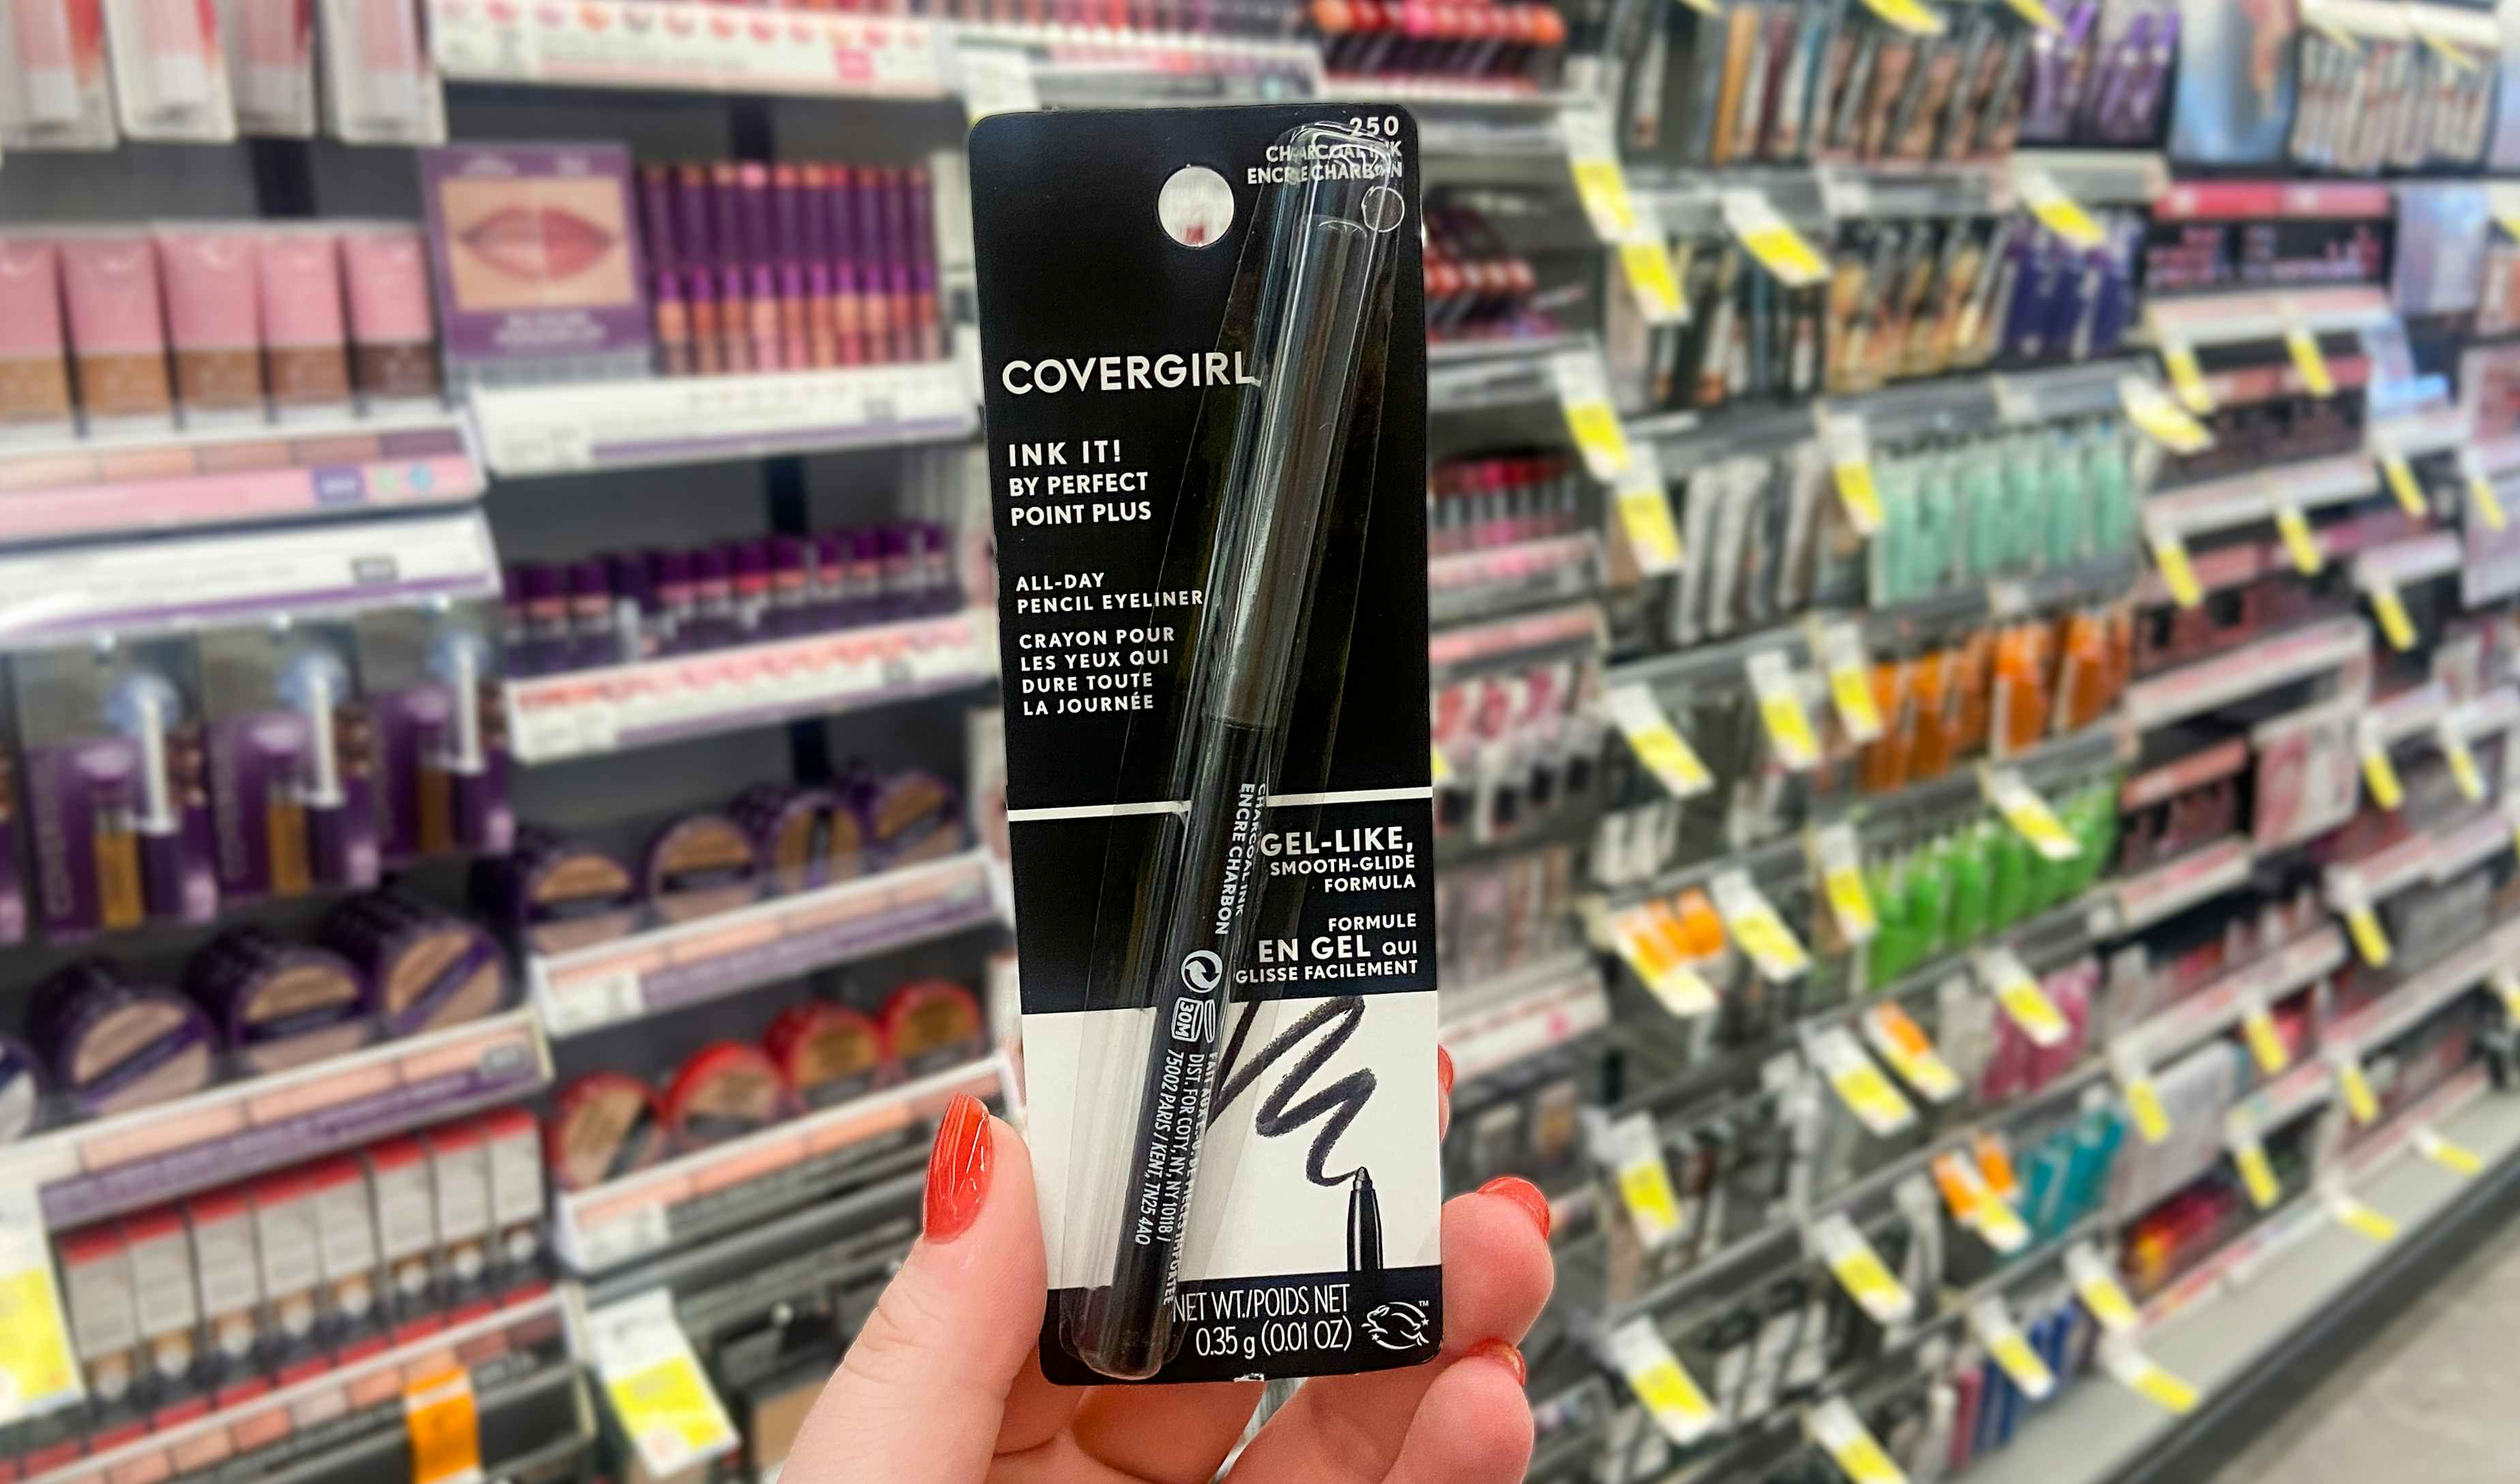 Covergirl Eyeliner, as Low as $2.55 on Amazon (Reg. $8.49)